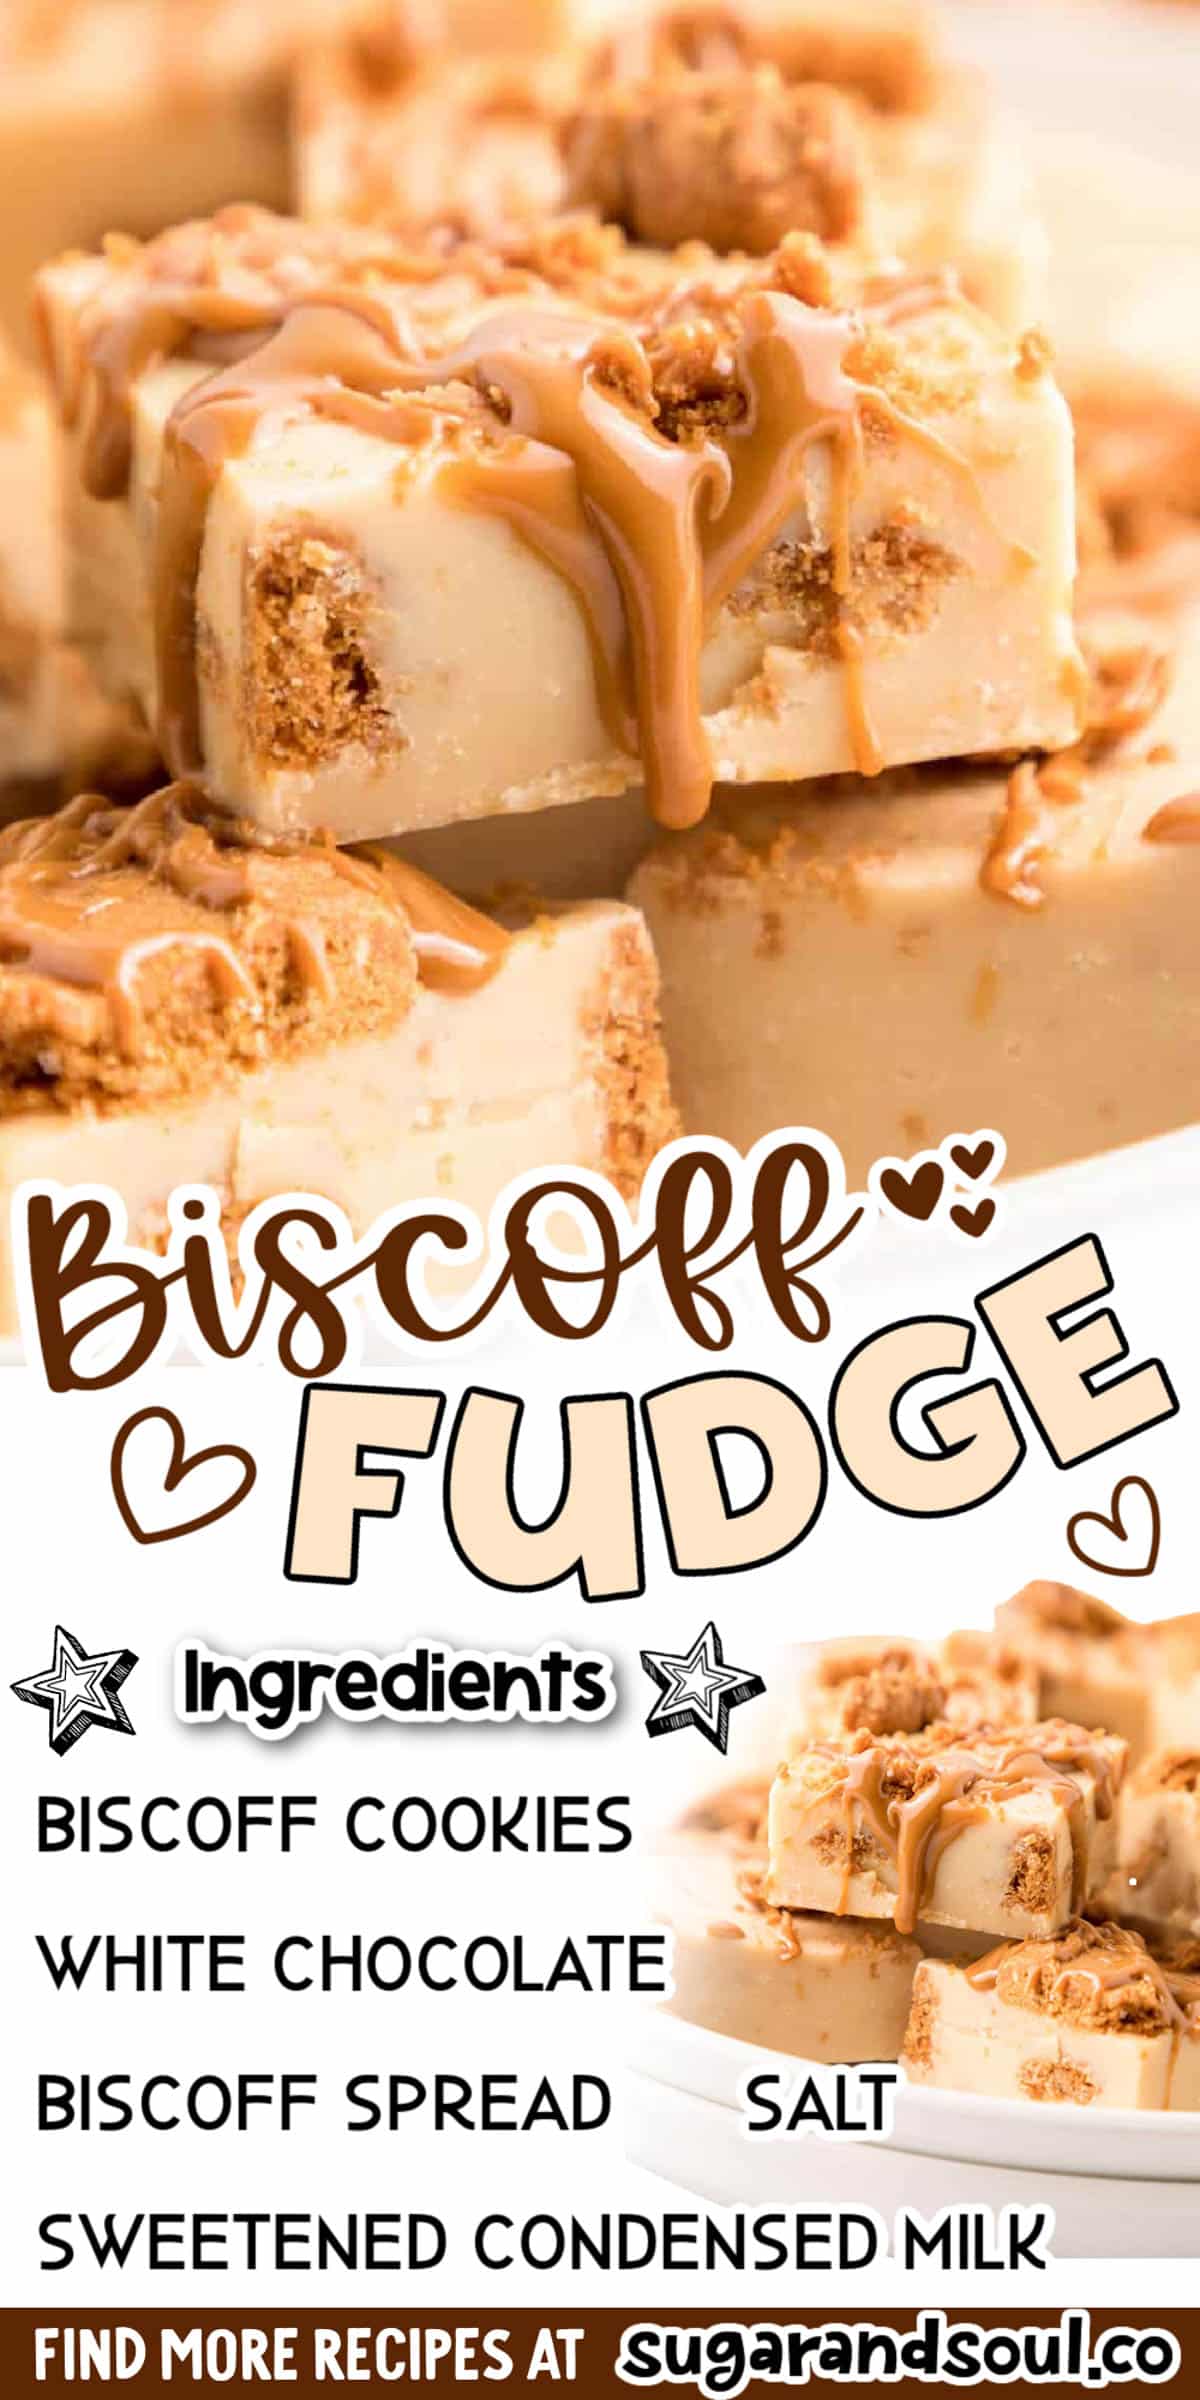 This Biscoff Fudge is a quick and easy 5 ingredient recipe that's loaded with crunchy Biscoff cookies and then drizzled with melted Biscoff spread! No candy thermometer required! via @sugarandsoulco